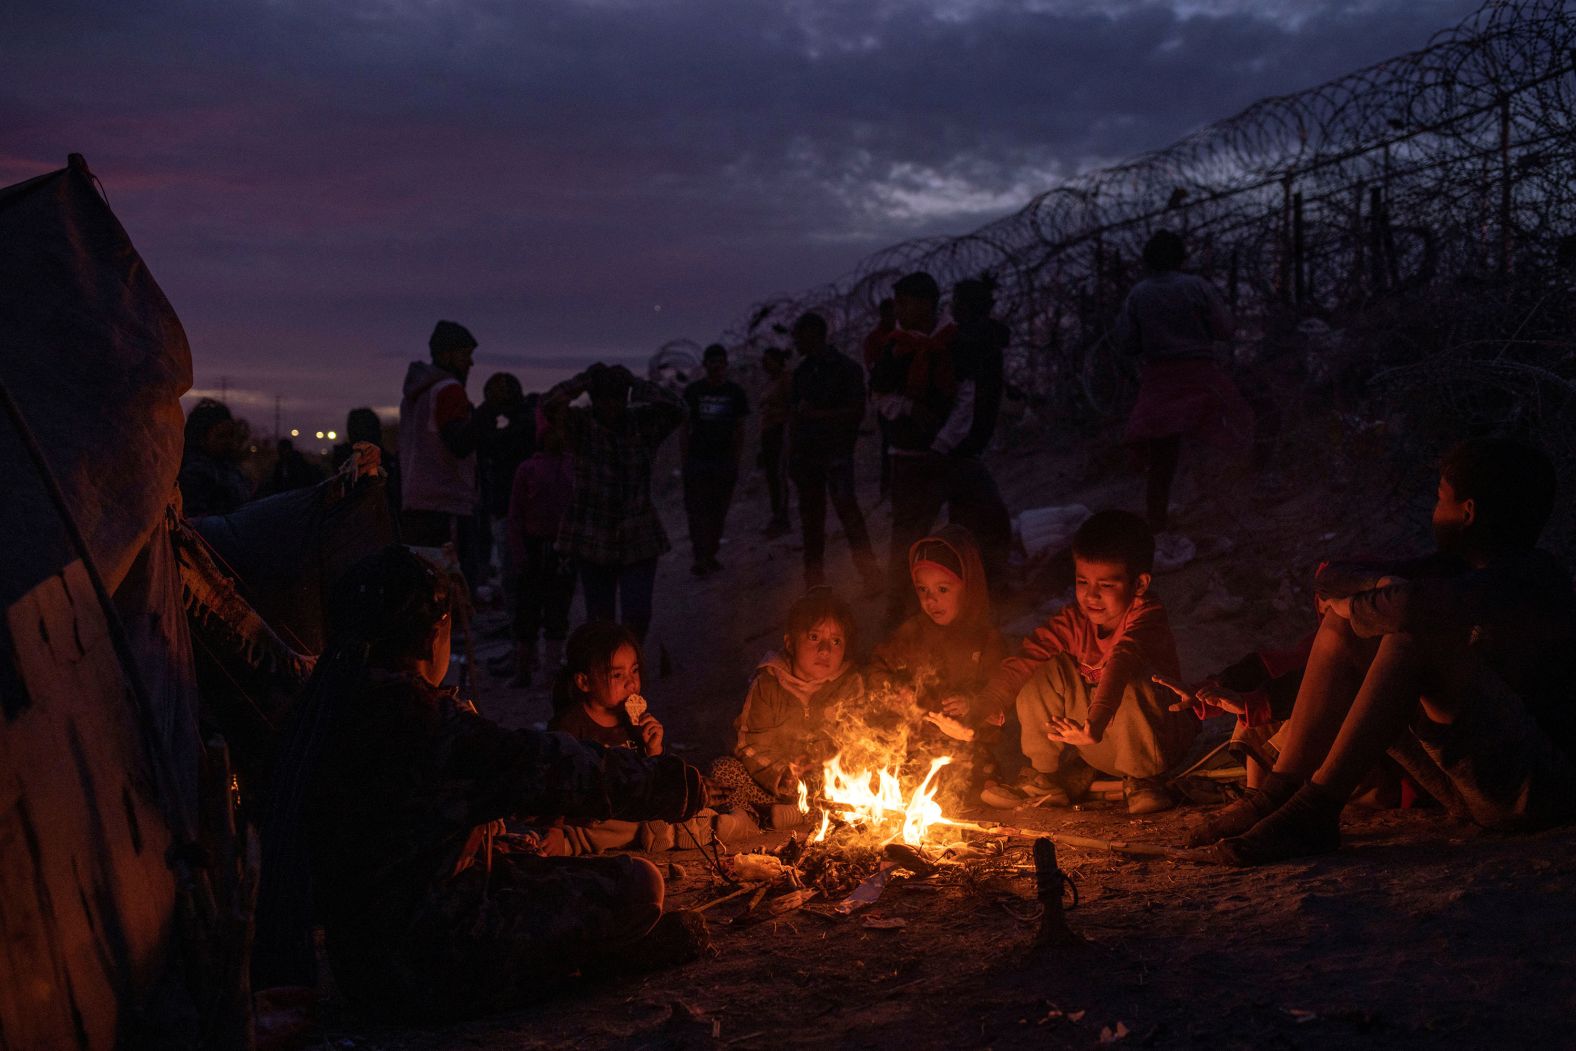 Migrant children sit around a fire along the bank of the Rio Grande river on Saturday, March 23, as they wait with their families to surrender to immigration authorities in Texas.